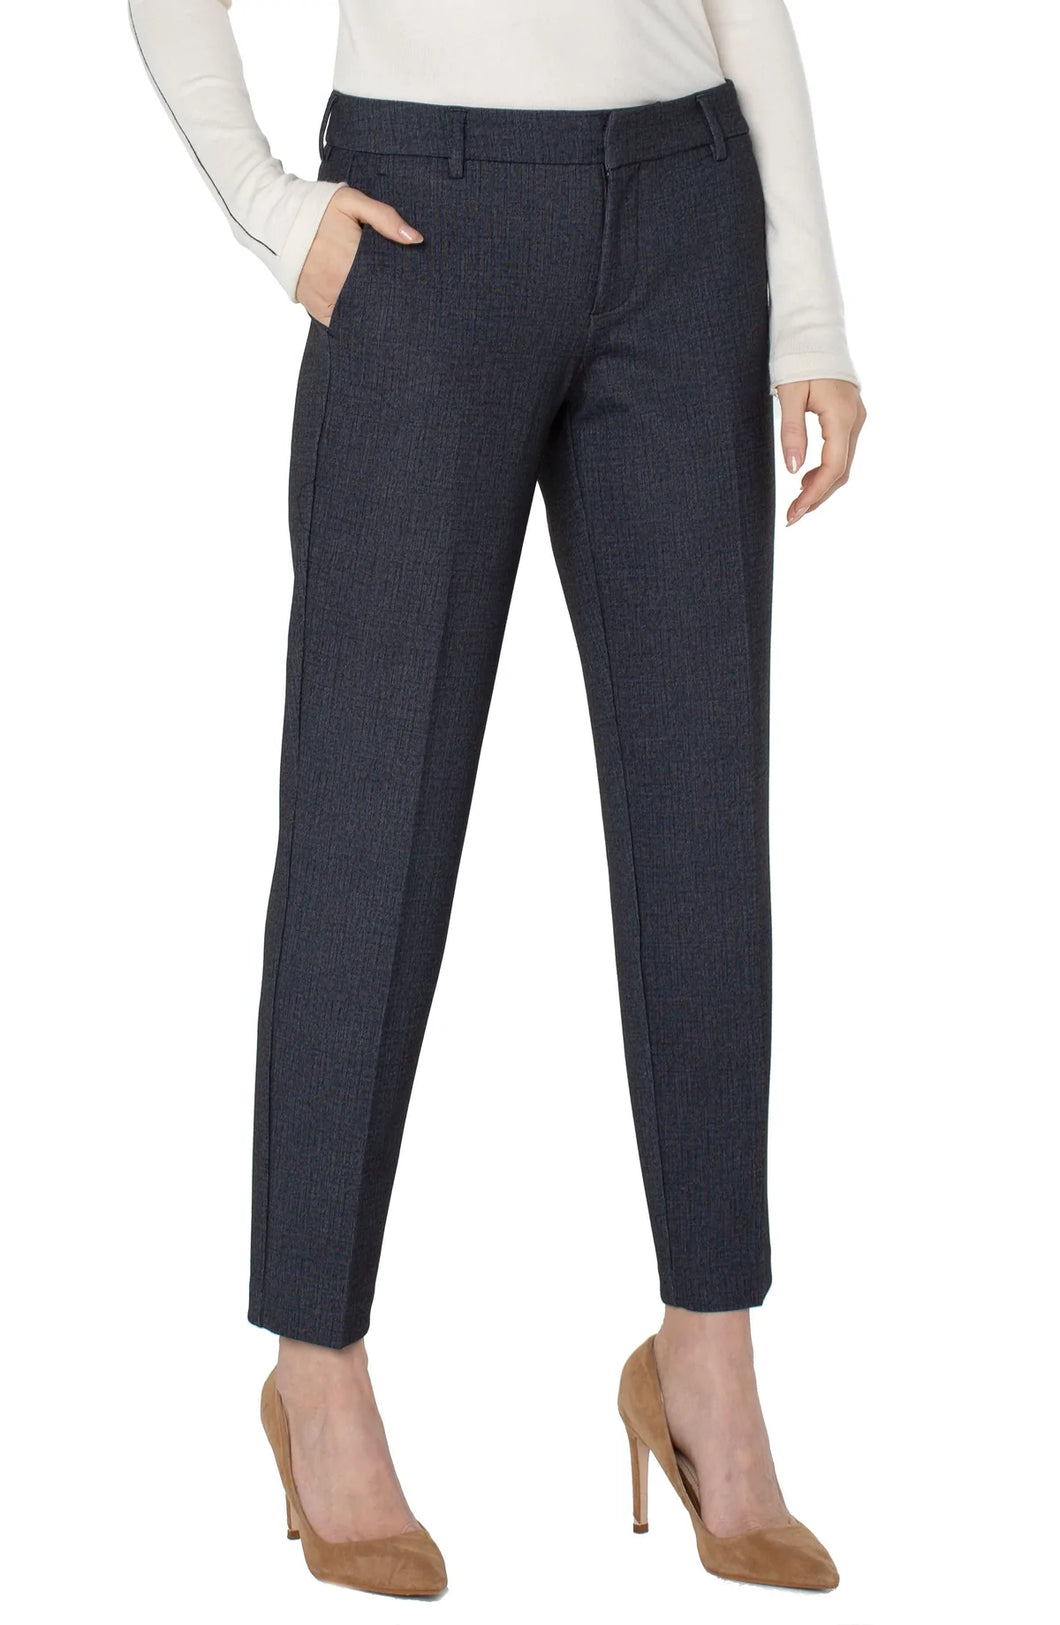 Kelsey Knit Trouser - Etched